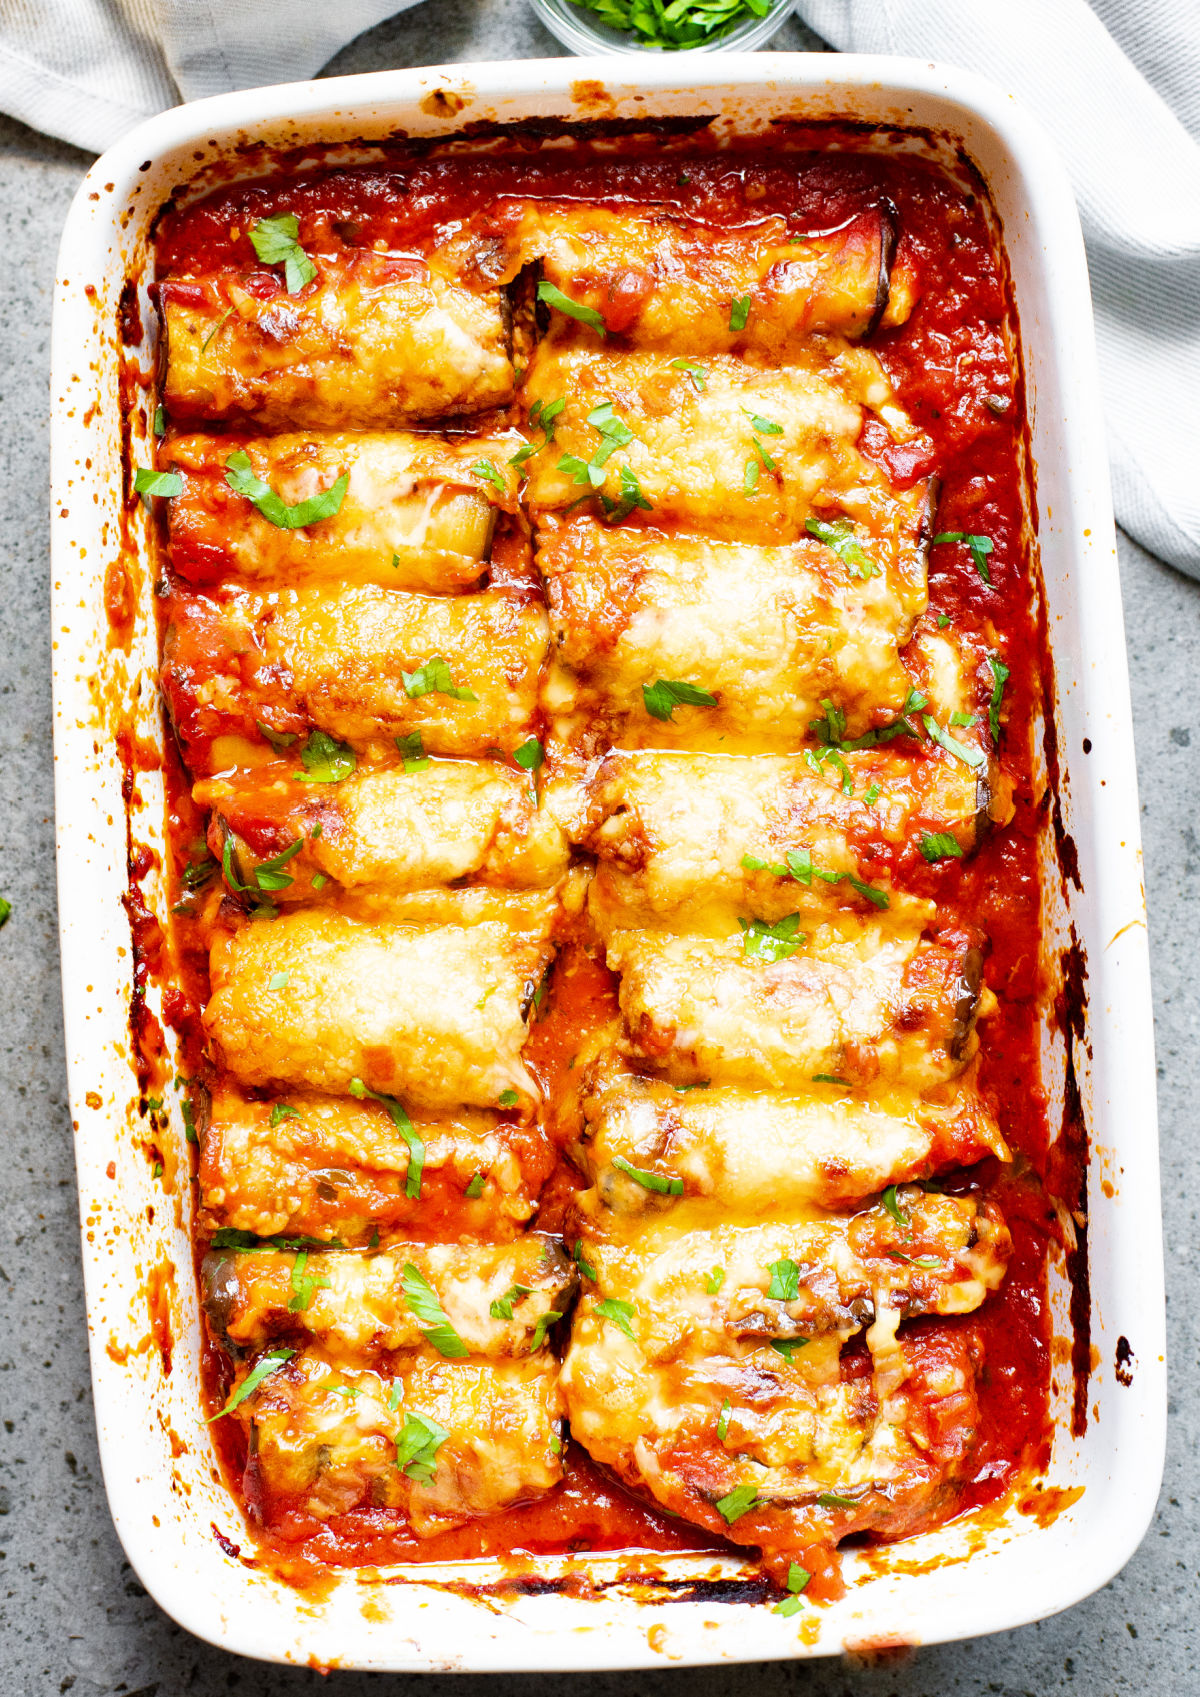 Eggplant rollatini assembled and baked in a 13x9 dish.